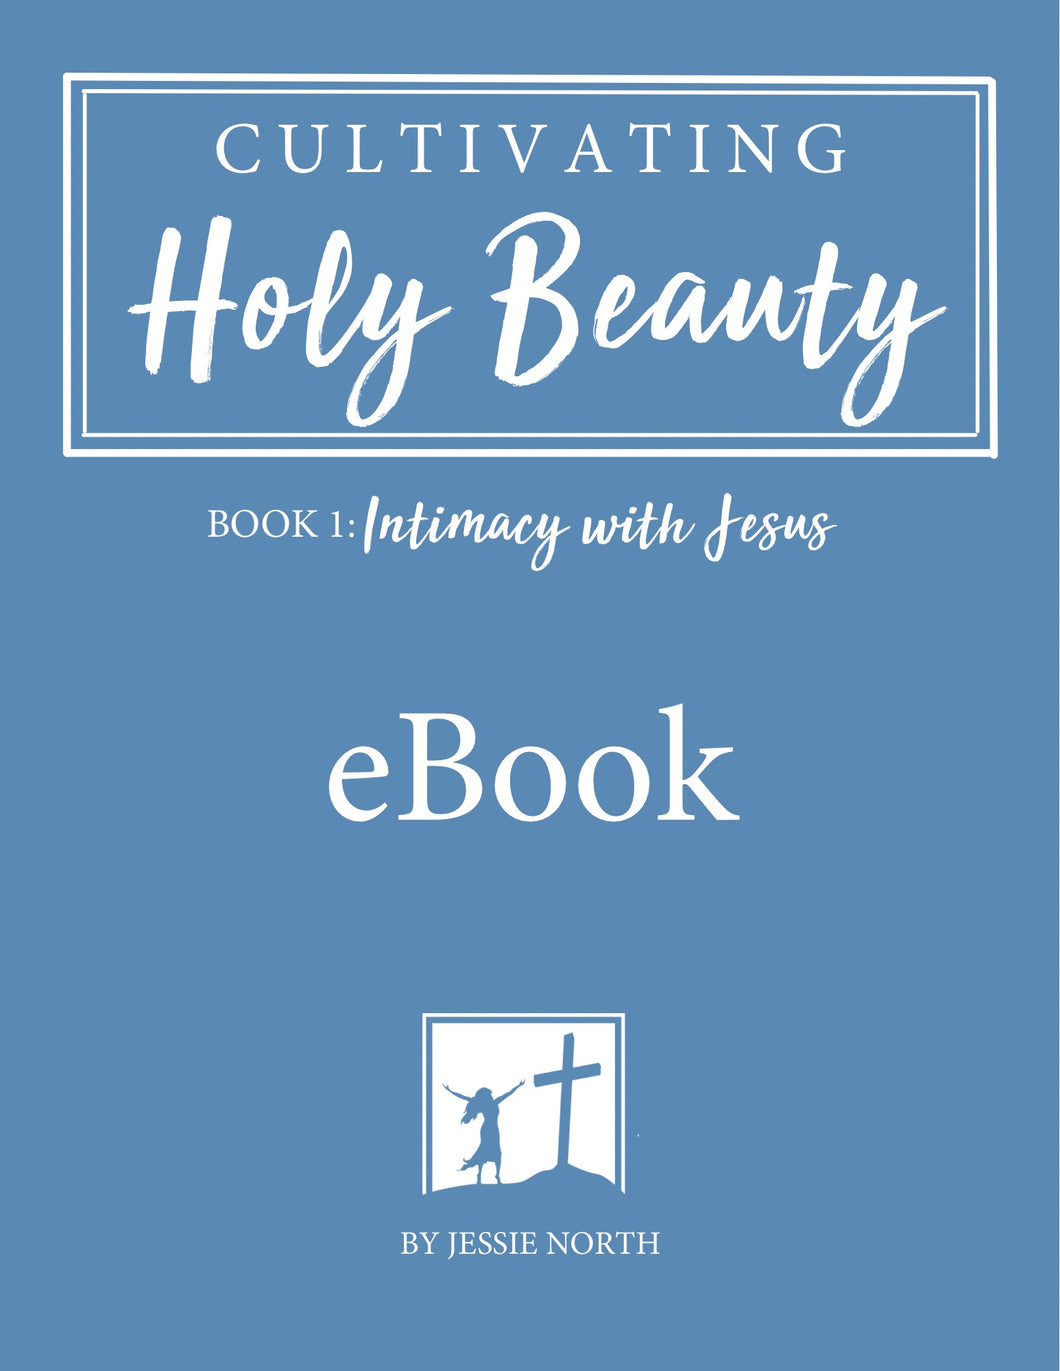 eBook 1 - Cultivating Holy Beauty Book 1: Intimacy with Jesus